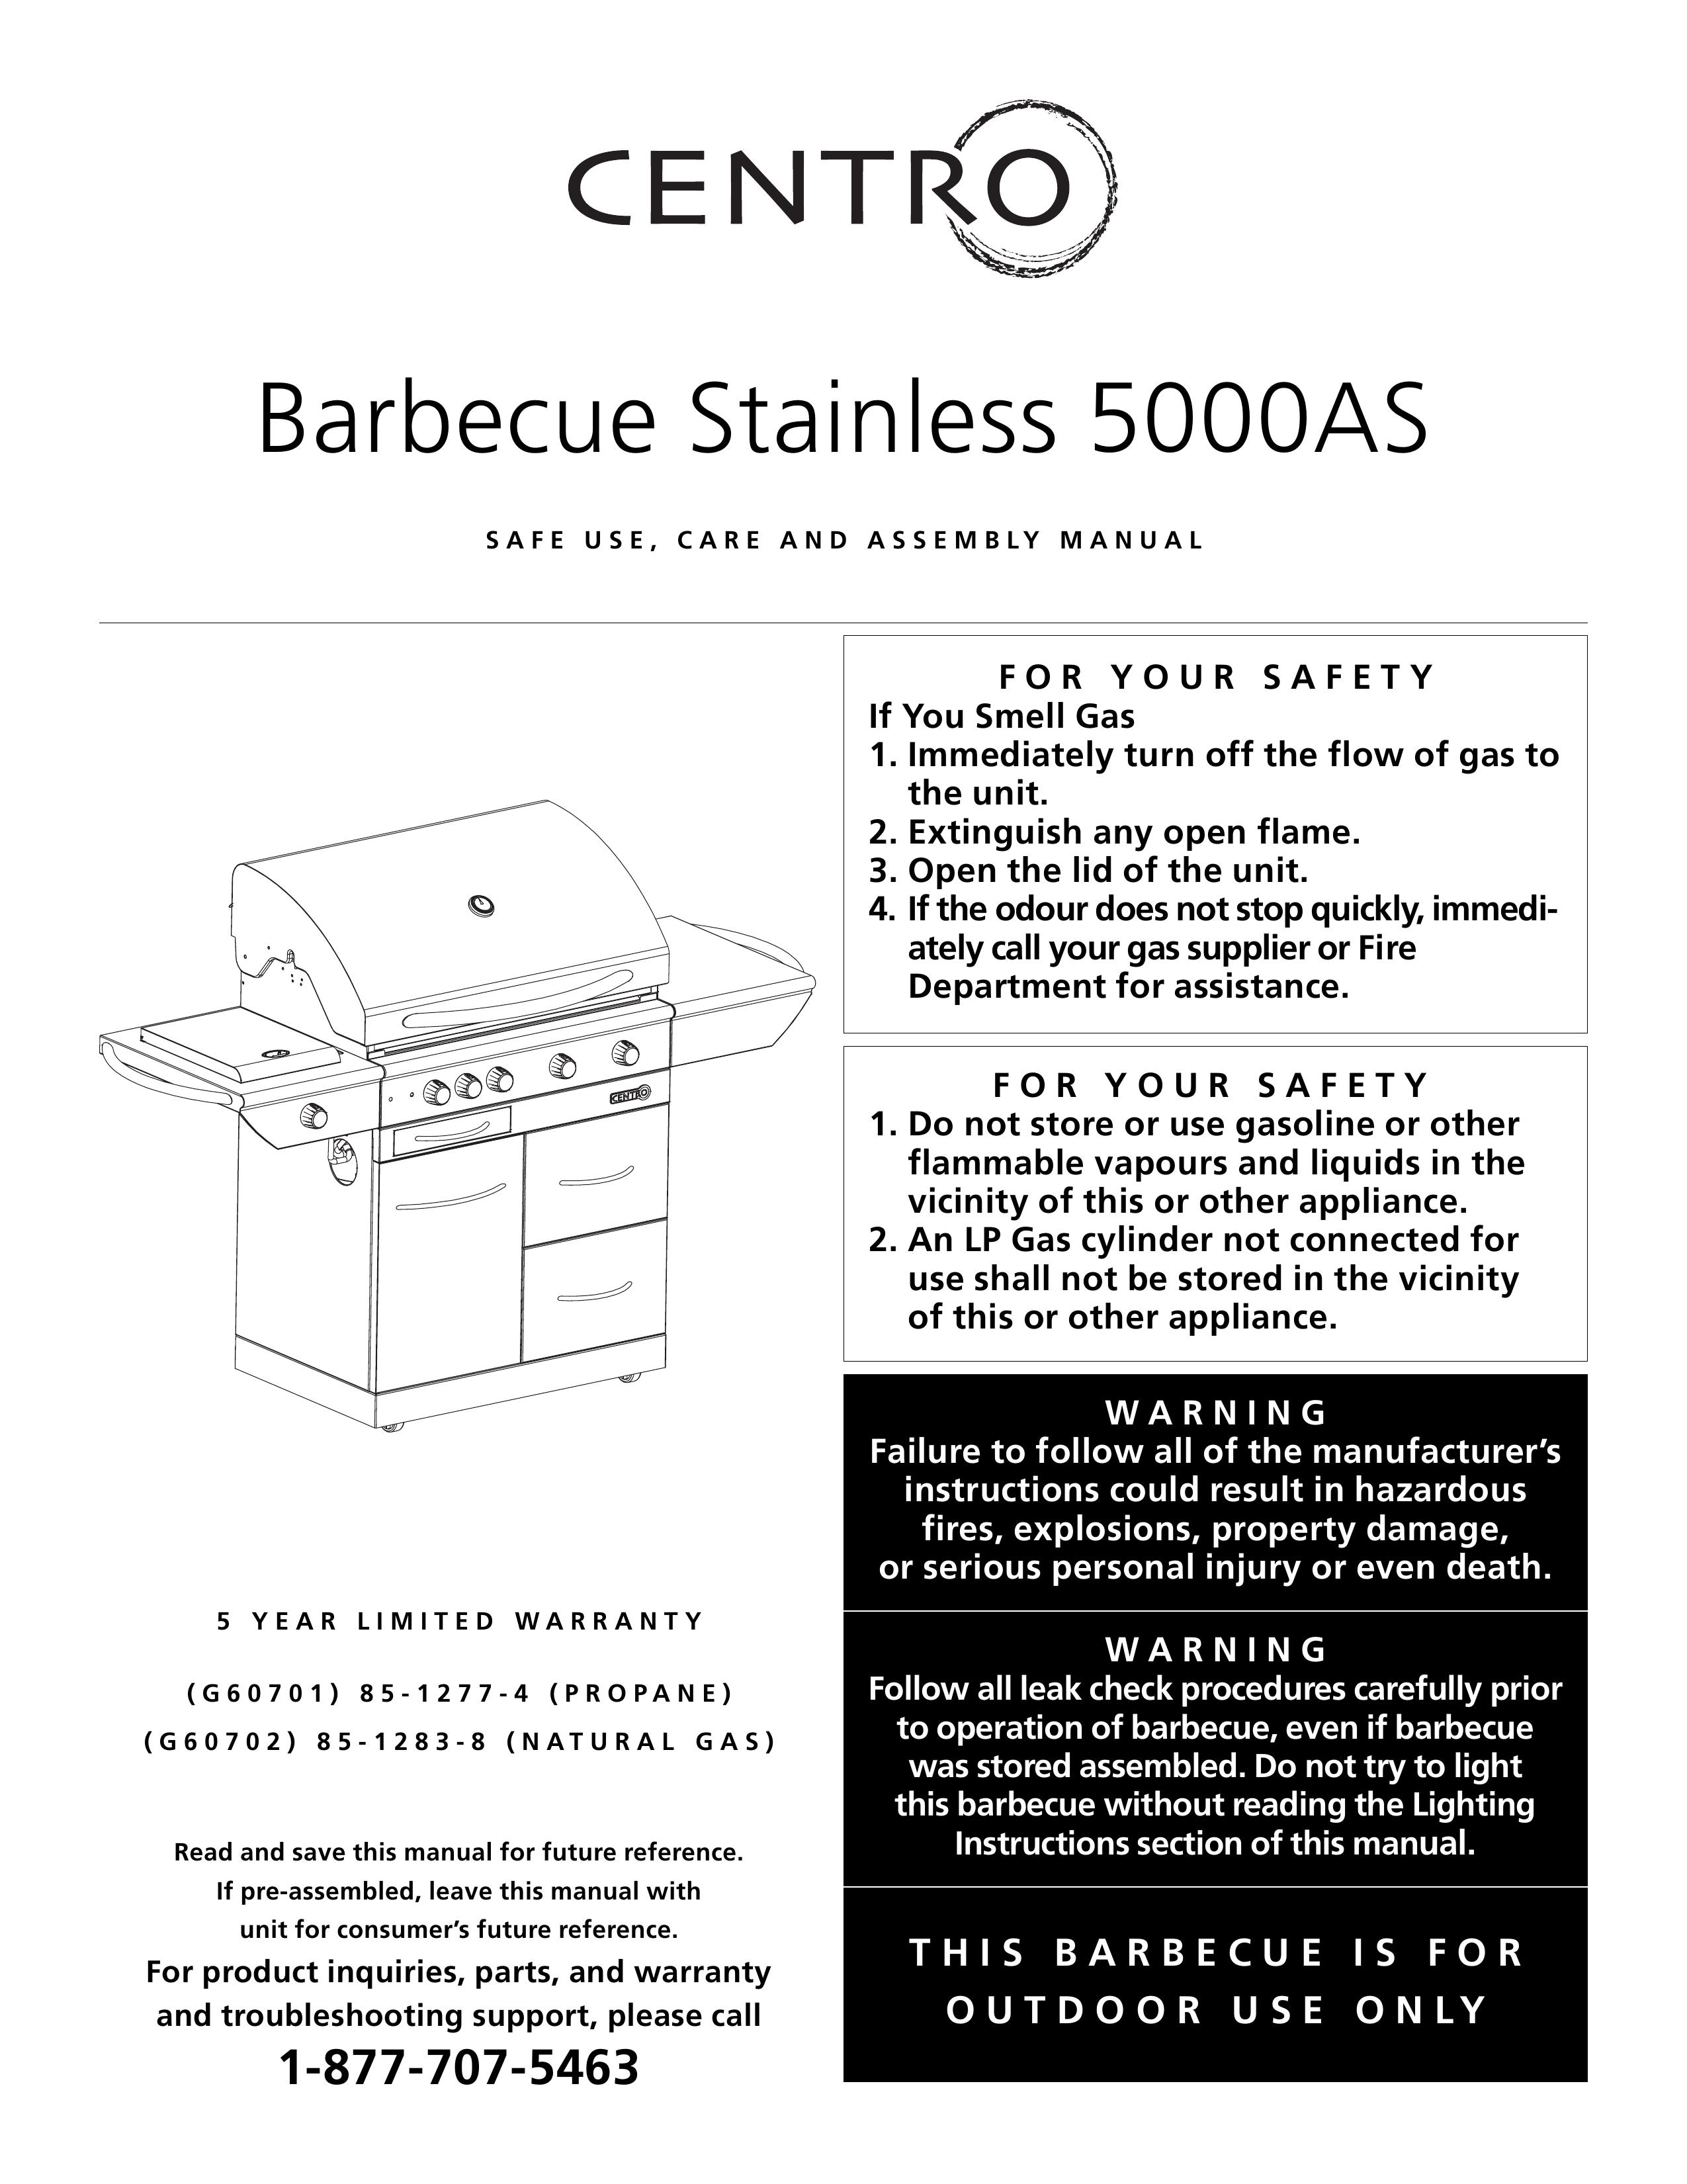 Centro 5000AS Gas Grill User Manual